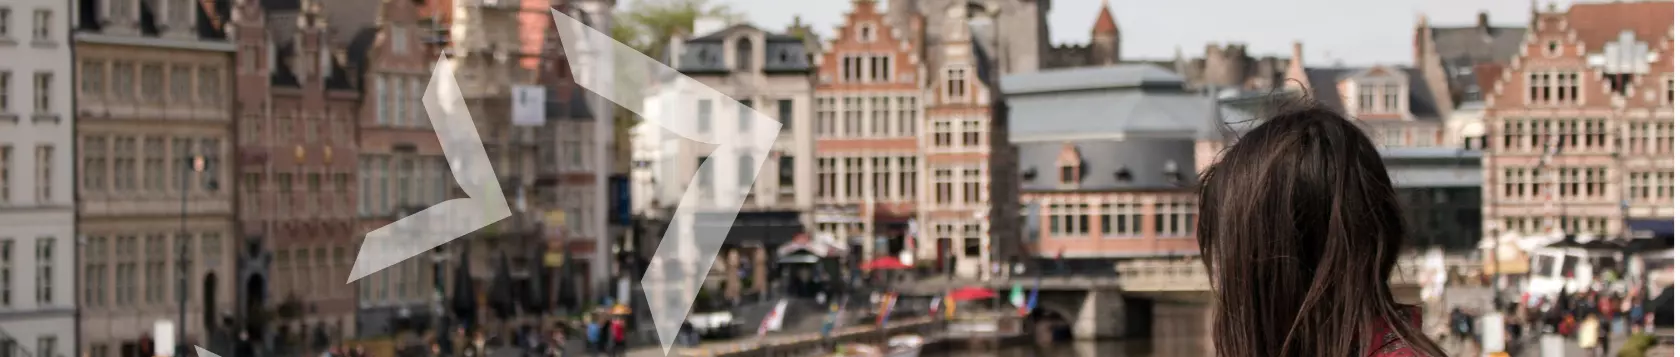 Invest in Ghent - Life in Ghent - header